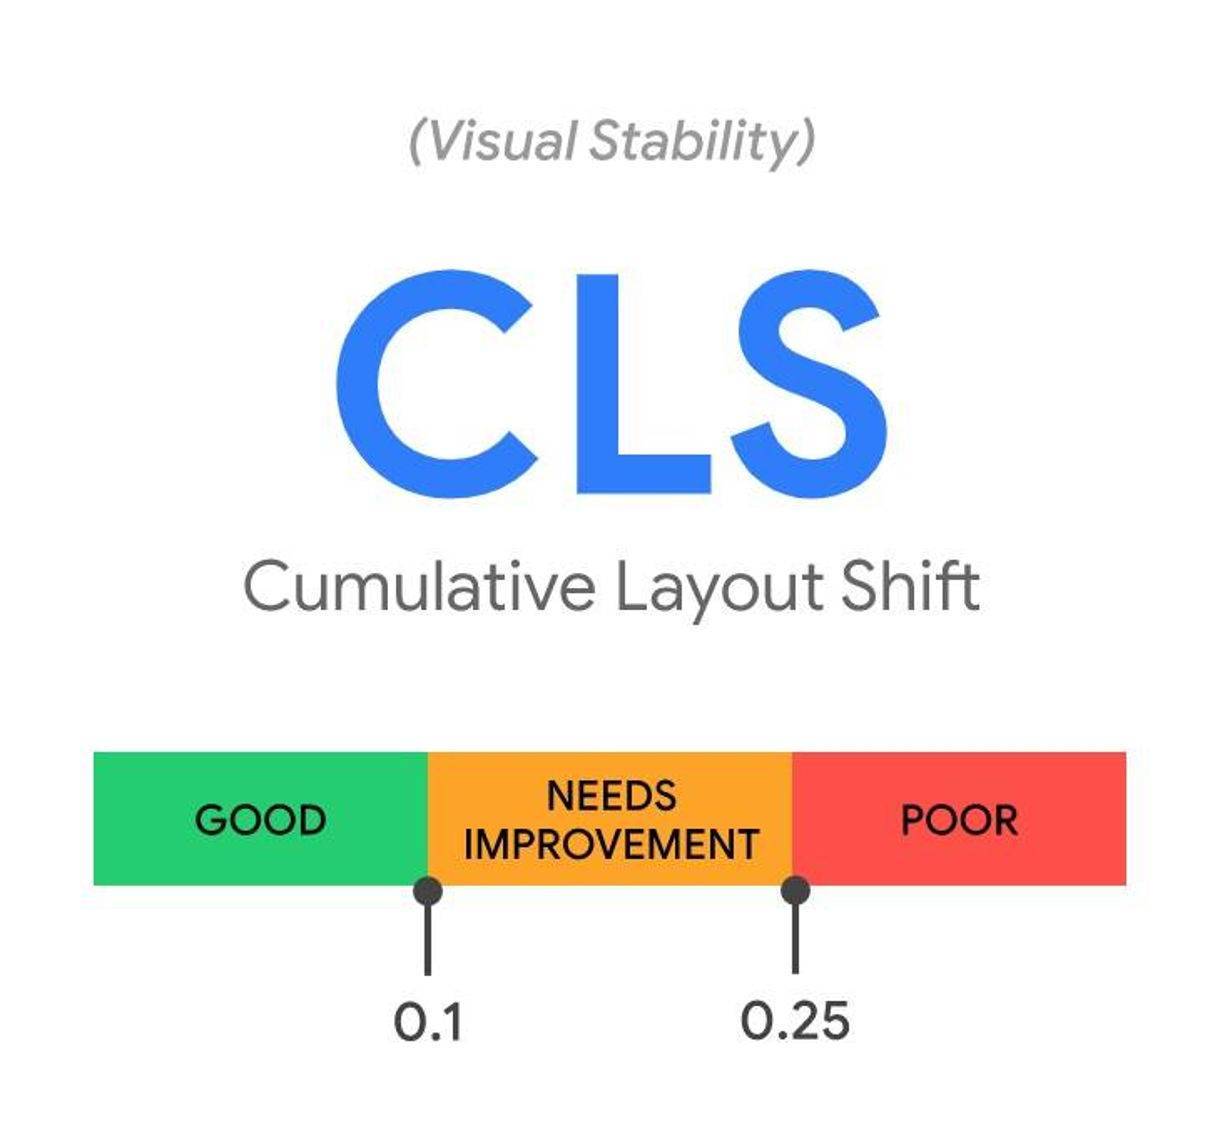 CLS Cumulative Layout Shift is a Core Web Vital that measures the visual stability of web pages